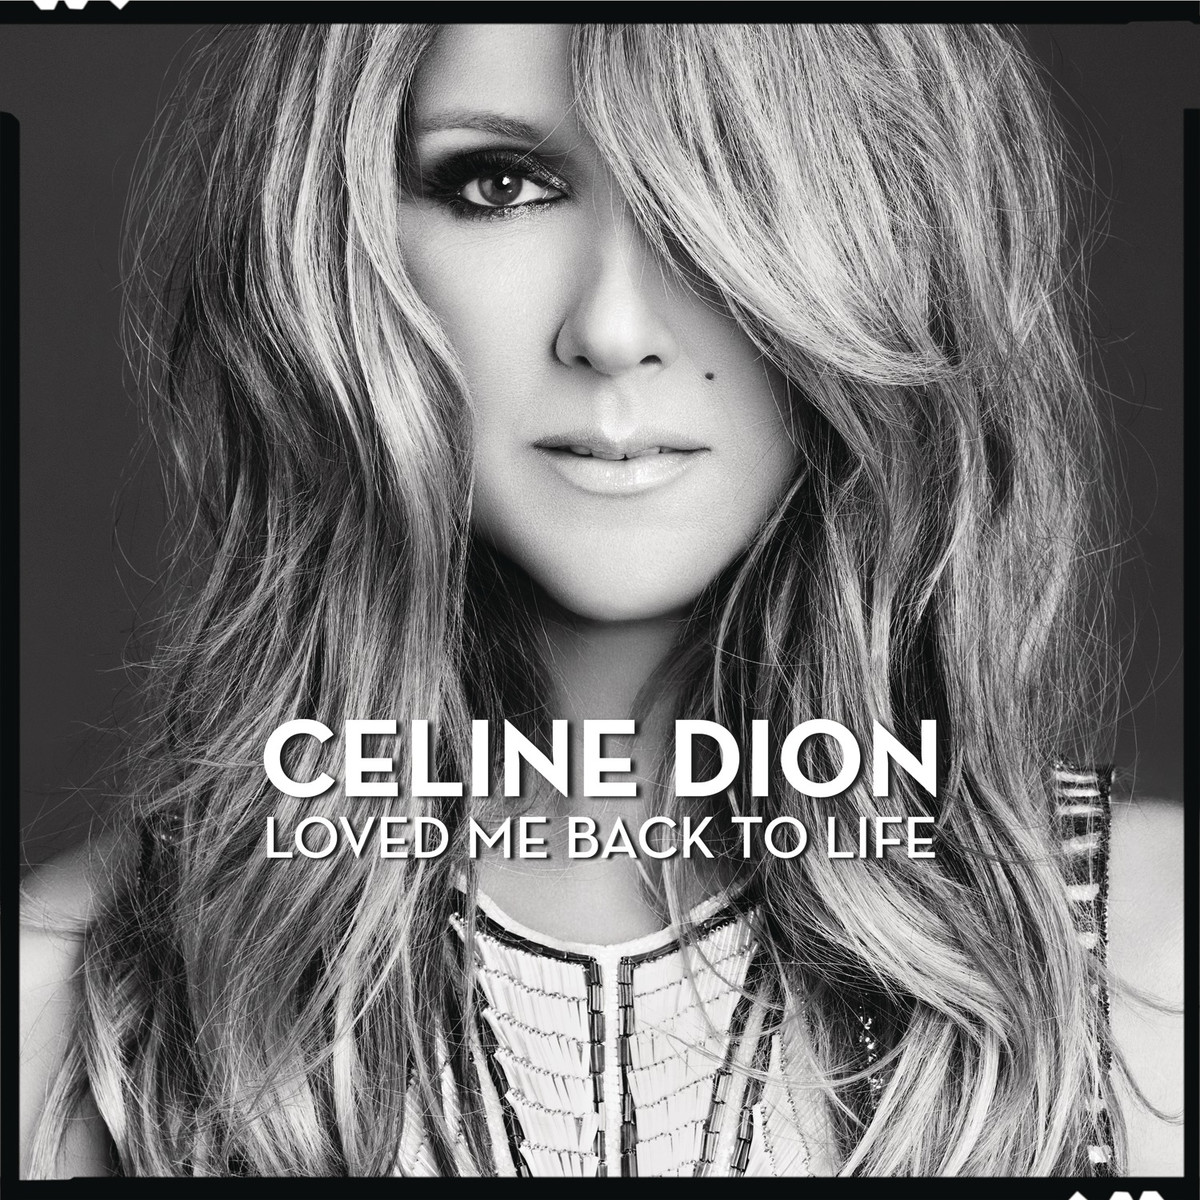 Céline-Dion-Loved-Me-Back-to-Life-Album-2013-1200x1200.png